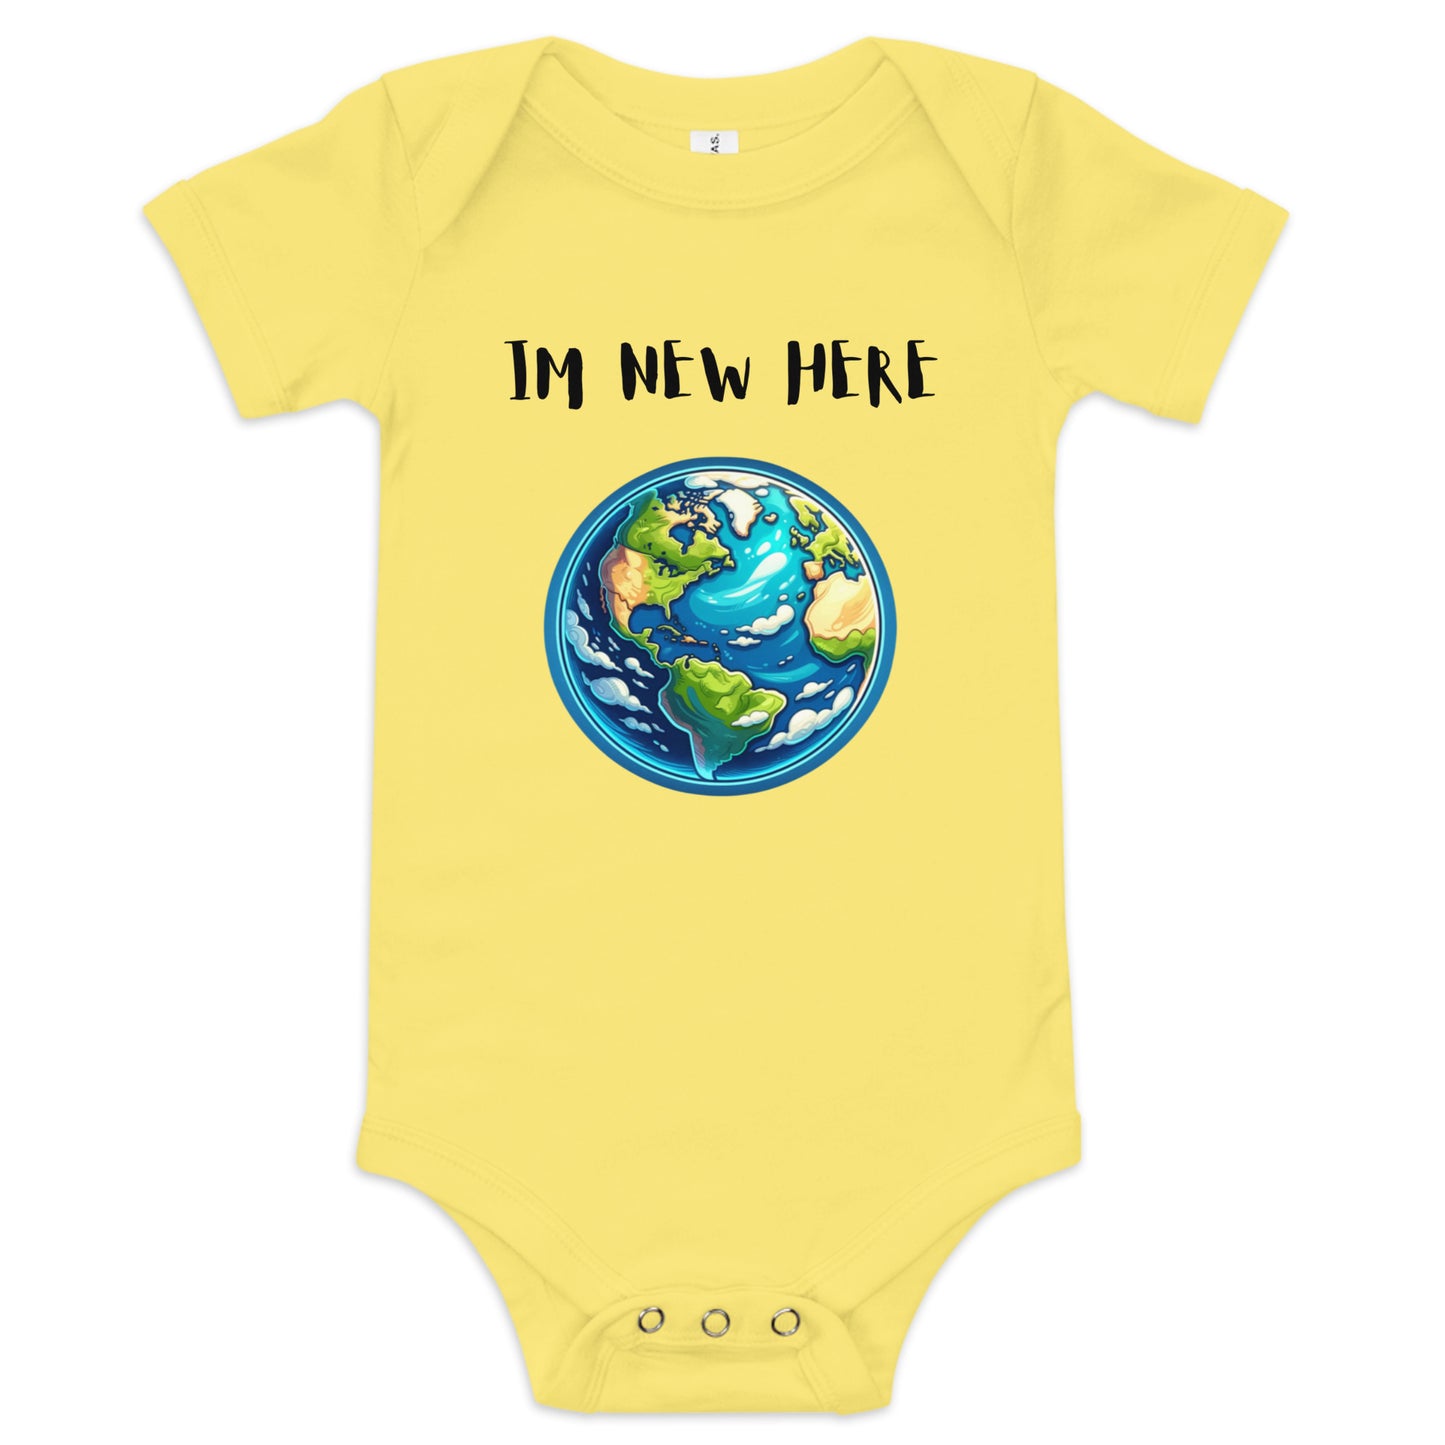 Adorable baby onesie with a vibrant Earth illustration and 'I'm New Here' text, perfect for introducing the newest little explorer to the world. Made from soft, comfortable fabric for your baby's delicate skin